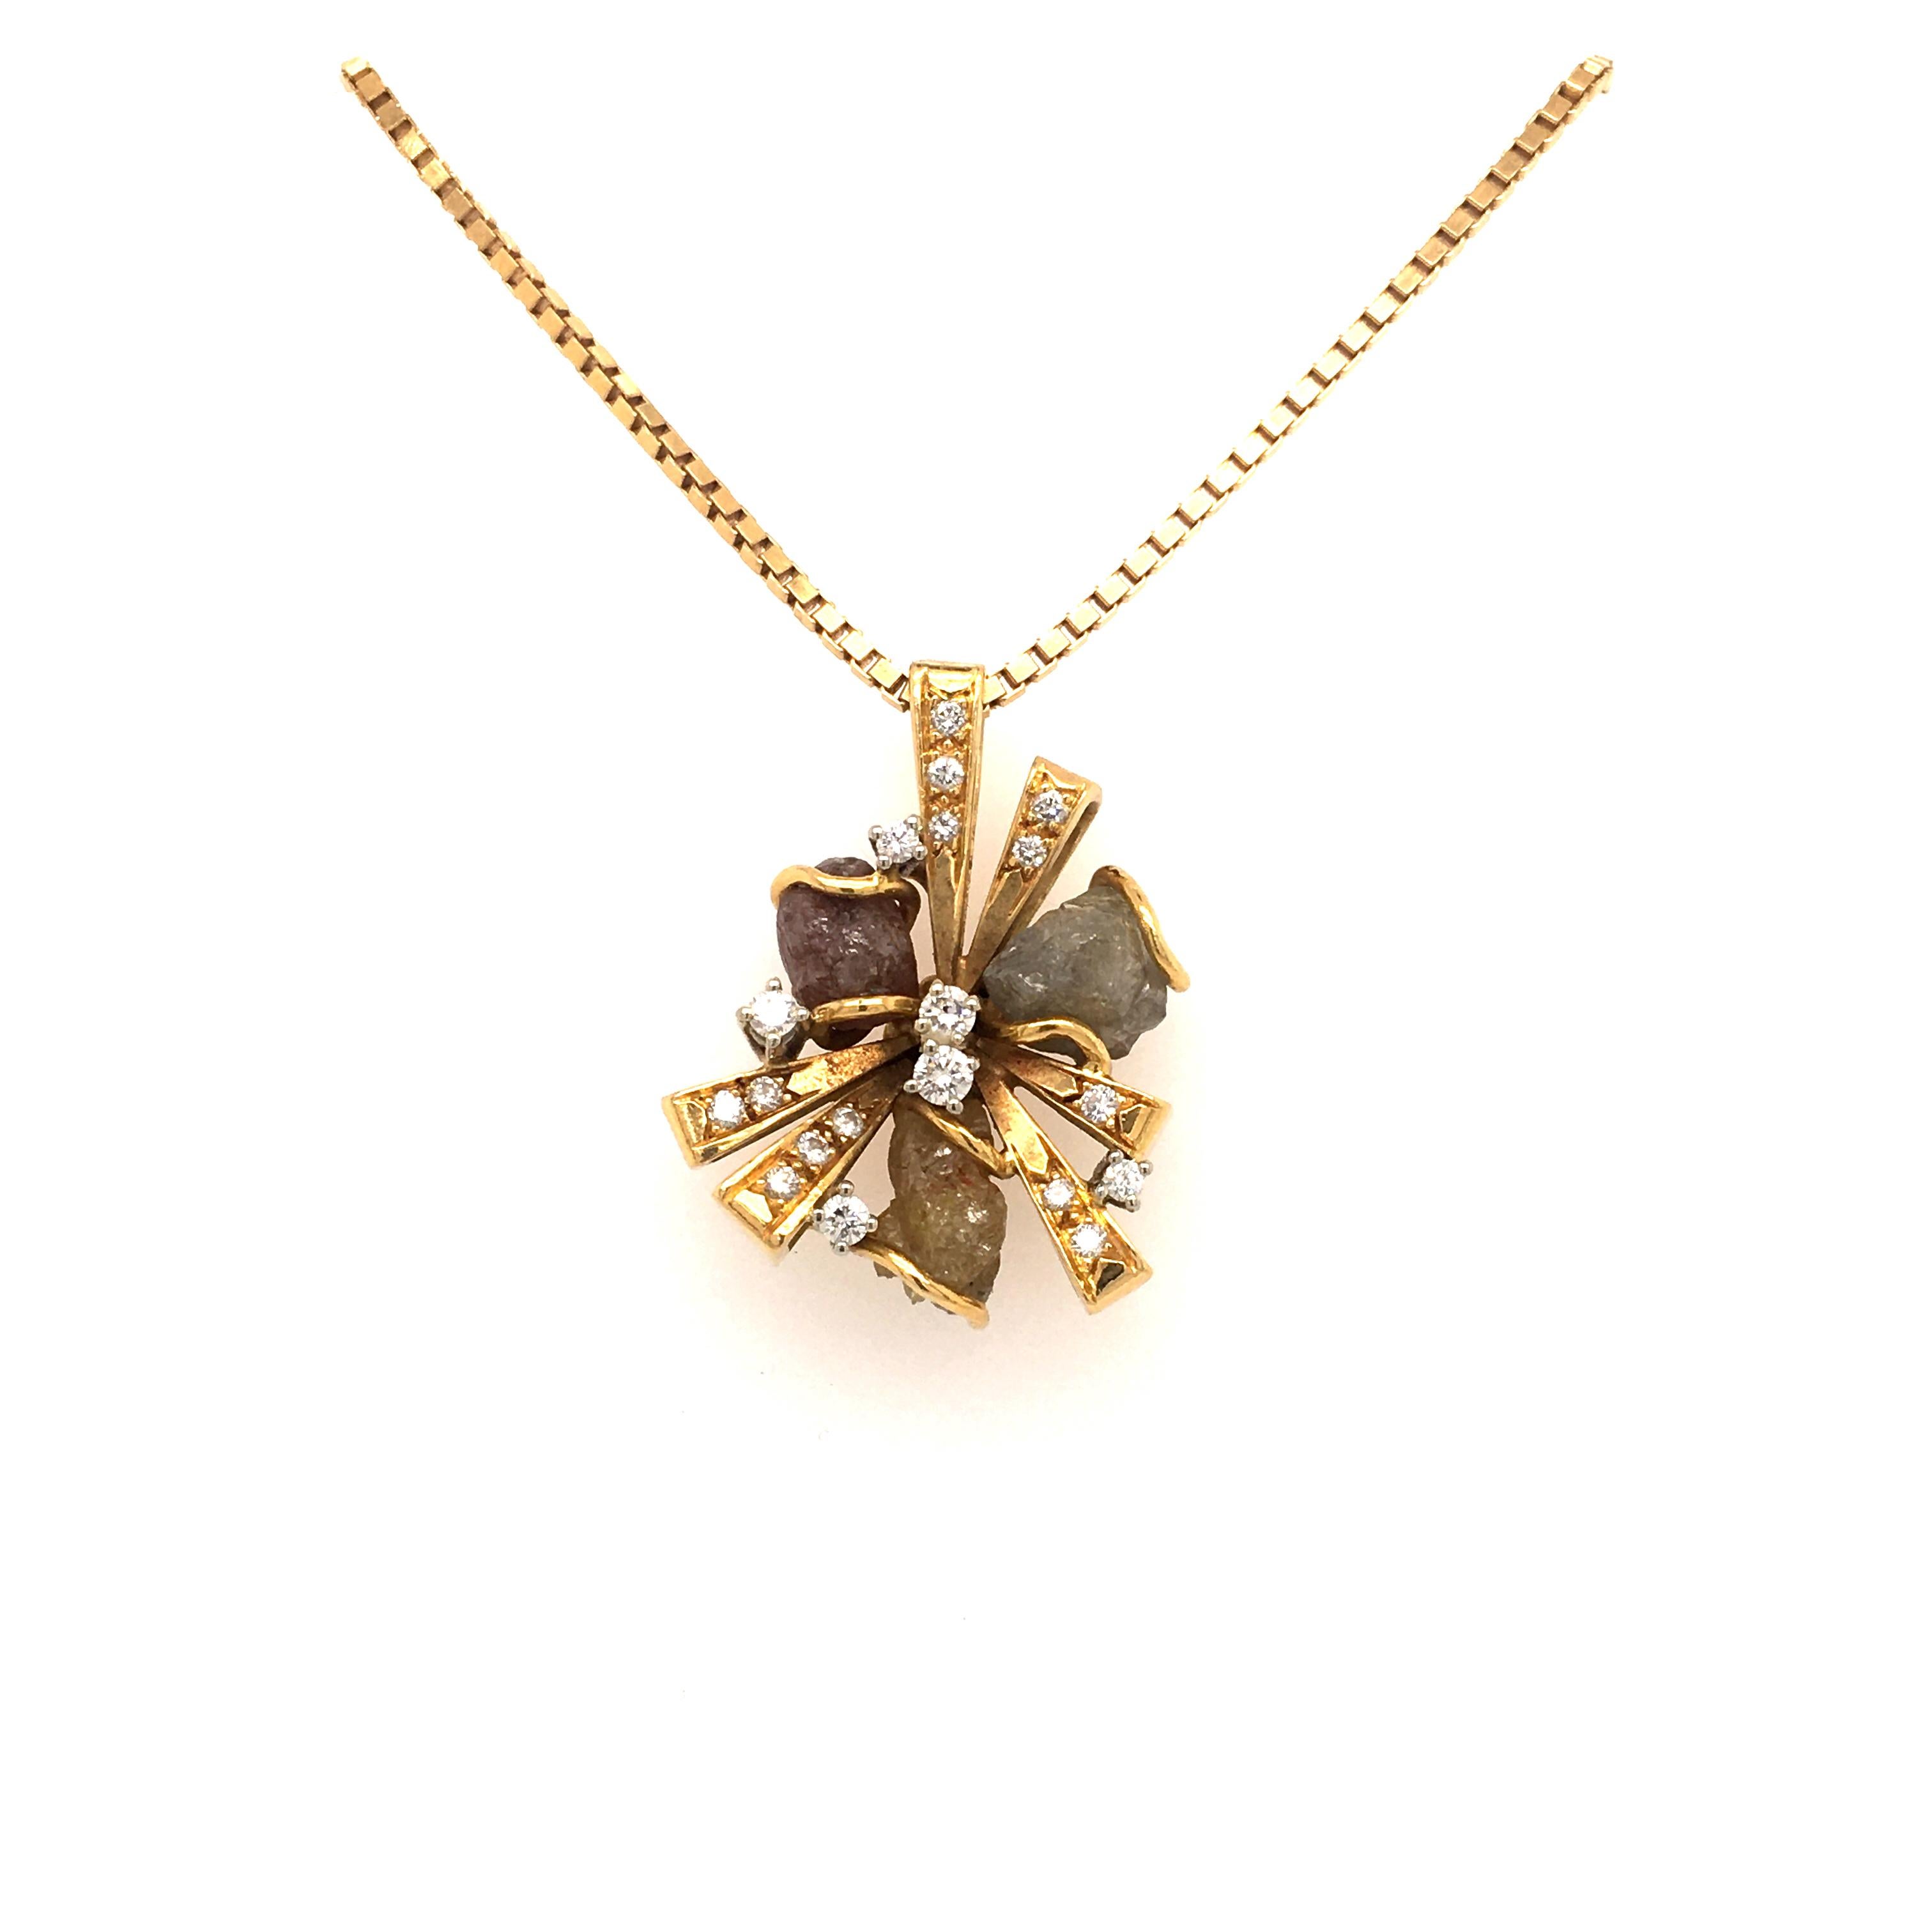 This exceptional pendant is made of 18k white and yellow gold. Set with 3 rough diamonds, in a brownish, grayish and yellowish tone. The 19 brilliant cut diamonds are totalling 0.30 ct with G/H-vs Quality. 

we have some more jewels with rough